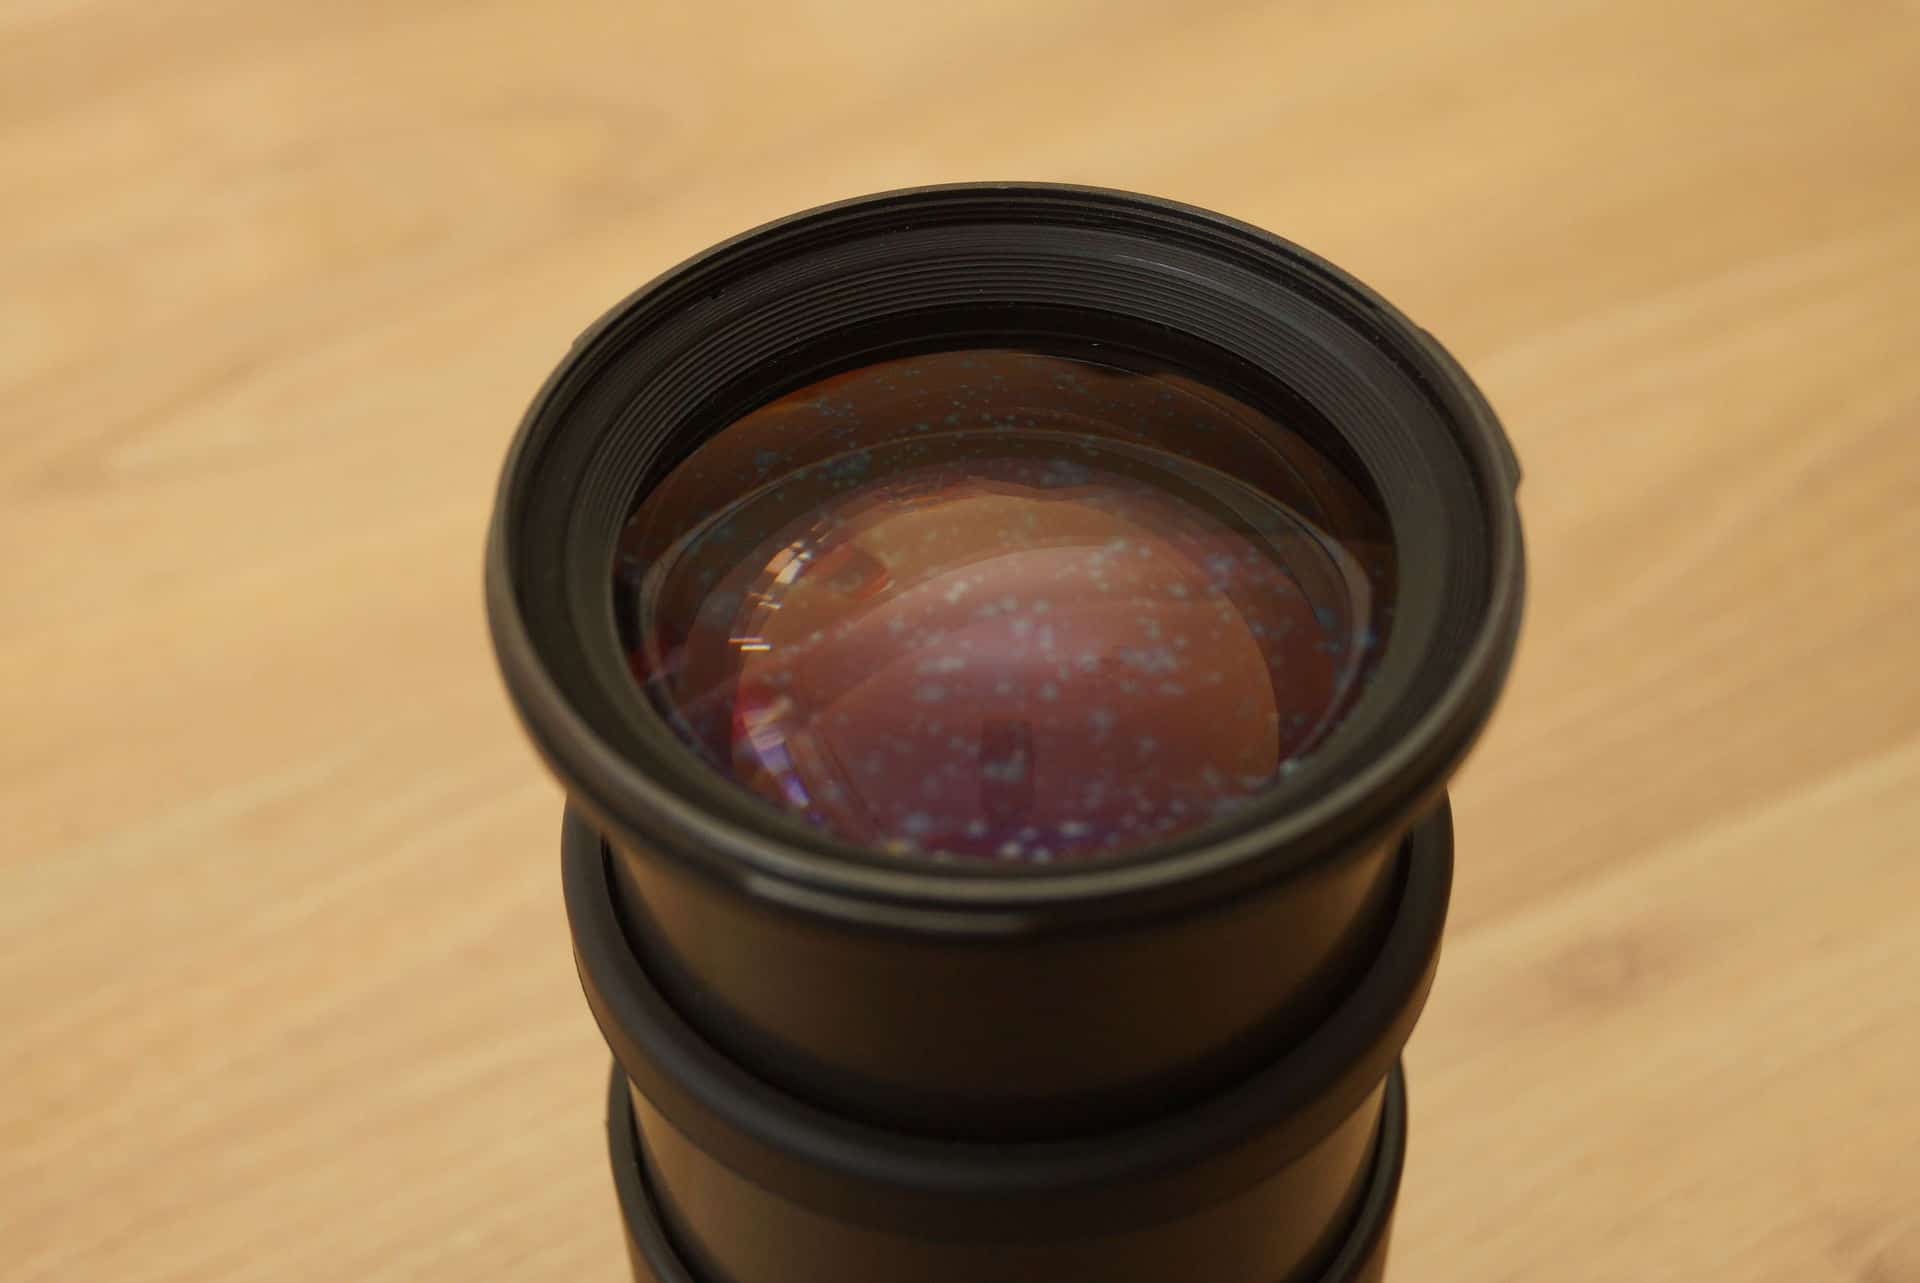 How to Tell if a Lens Coating Is Damaged